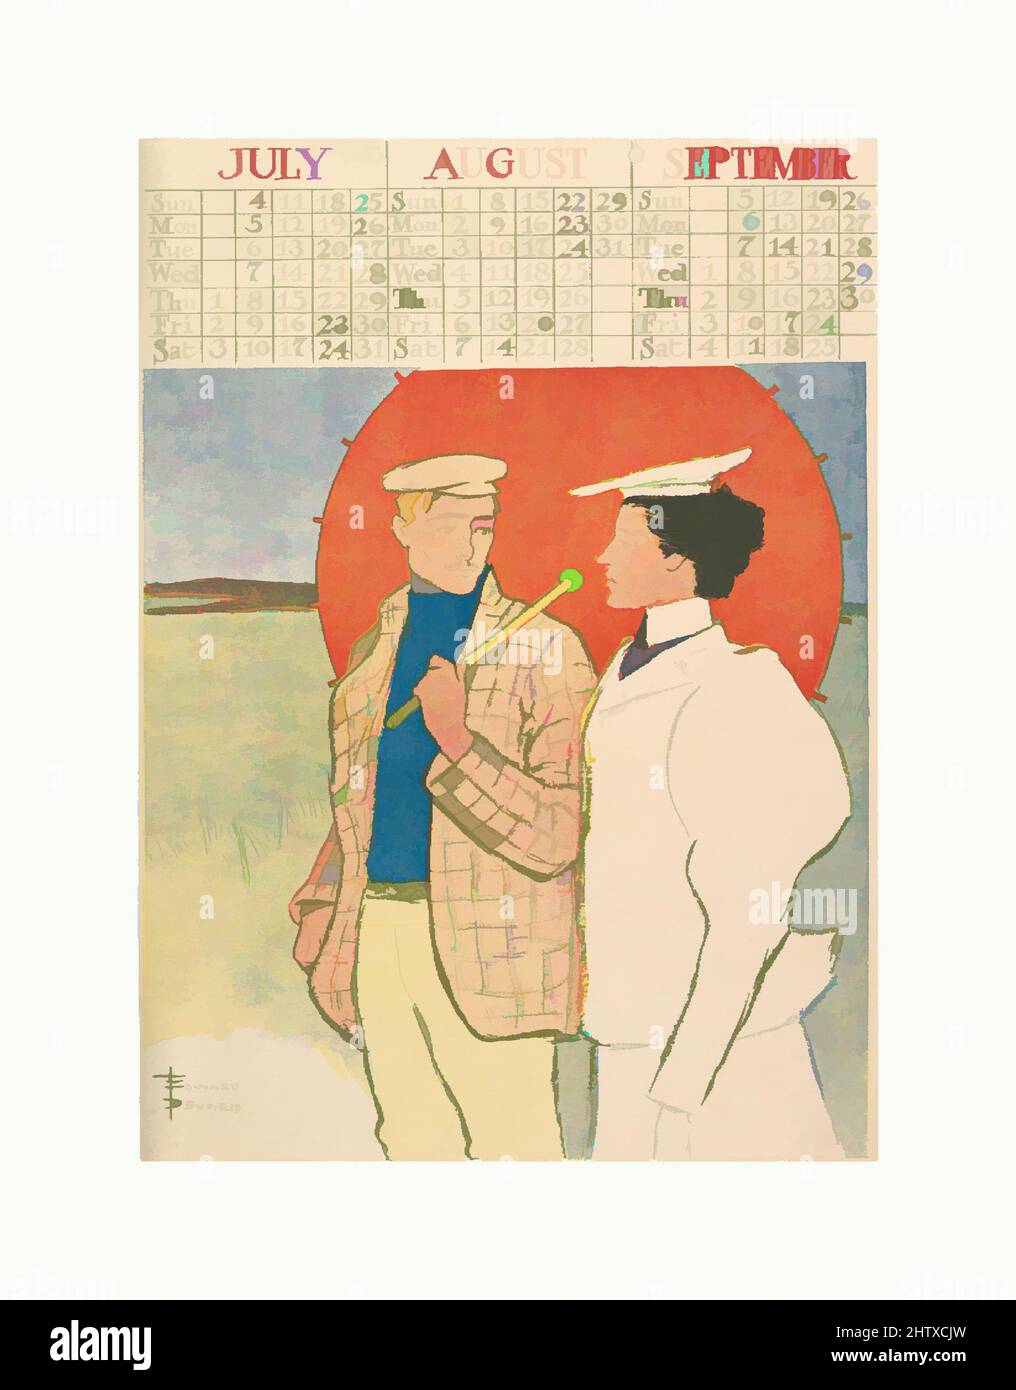 Art inspired by July, August, September, 1896, Commercial relief process and lithography, 14 x 10 3/16 in., Prints, Edward Penfield (American, Brooklyn, New York 1866–1925 Beacon, New York, Classic works modernized by Artotop with a splash of modernity. Shapes, color and value, eye-catching visual impact on art. Emotions through freedom of artworks in a contemporary way. A timeless message pursuing a wildly creative new direction. Artists turning to the digital medium and creating the Artotop NFT Stock Photo